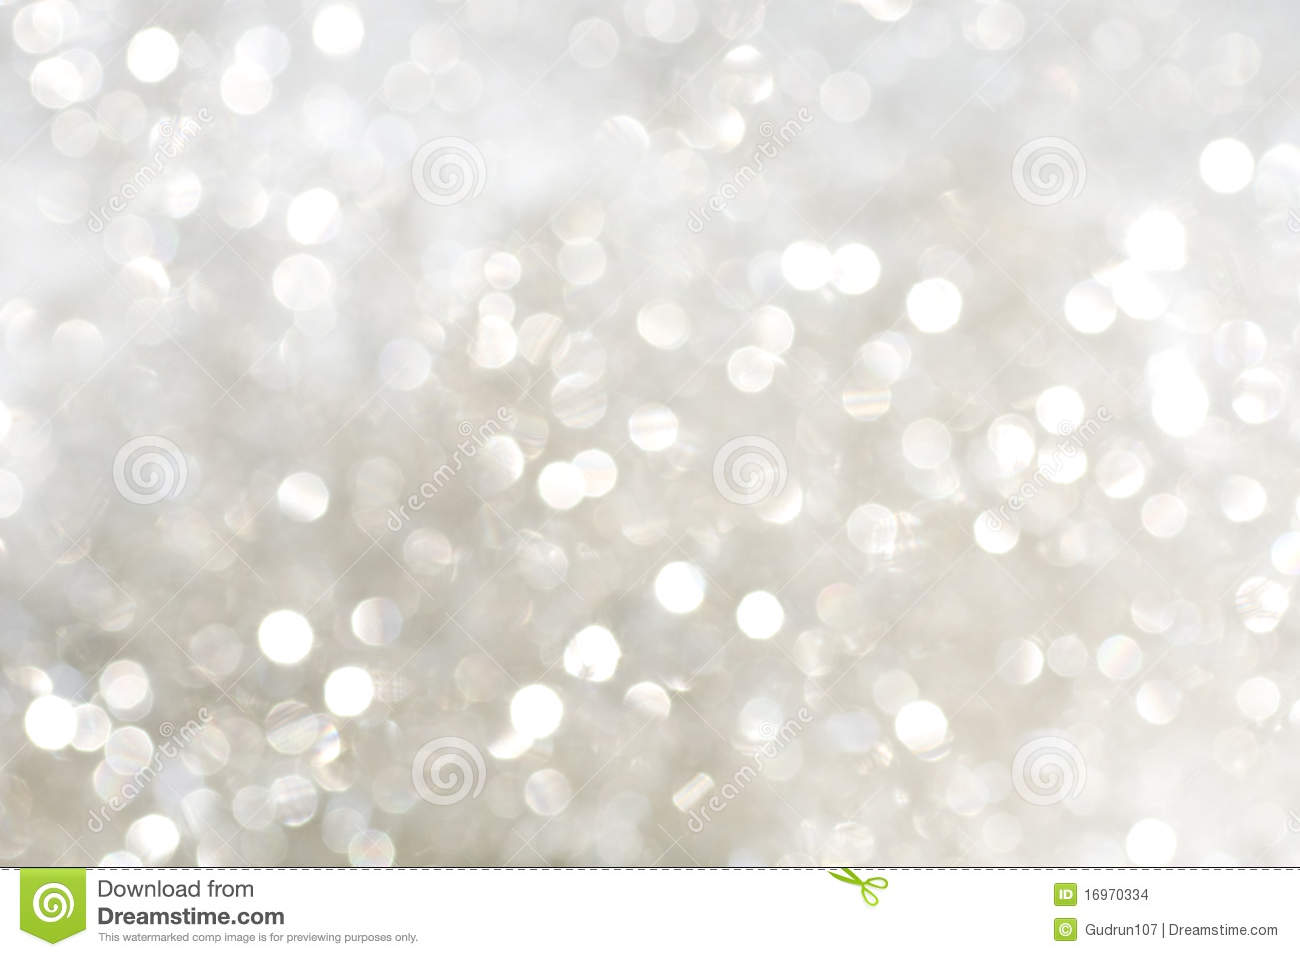 Silver Sparkles Clipart White And Silver Sparkles